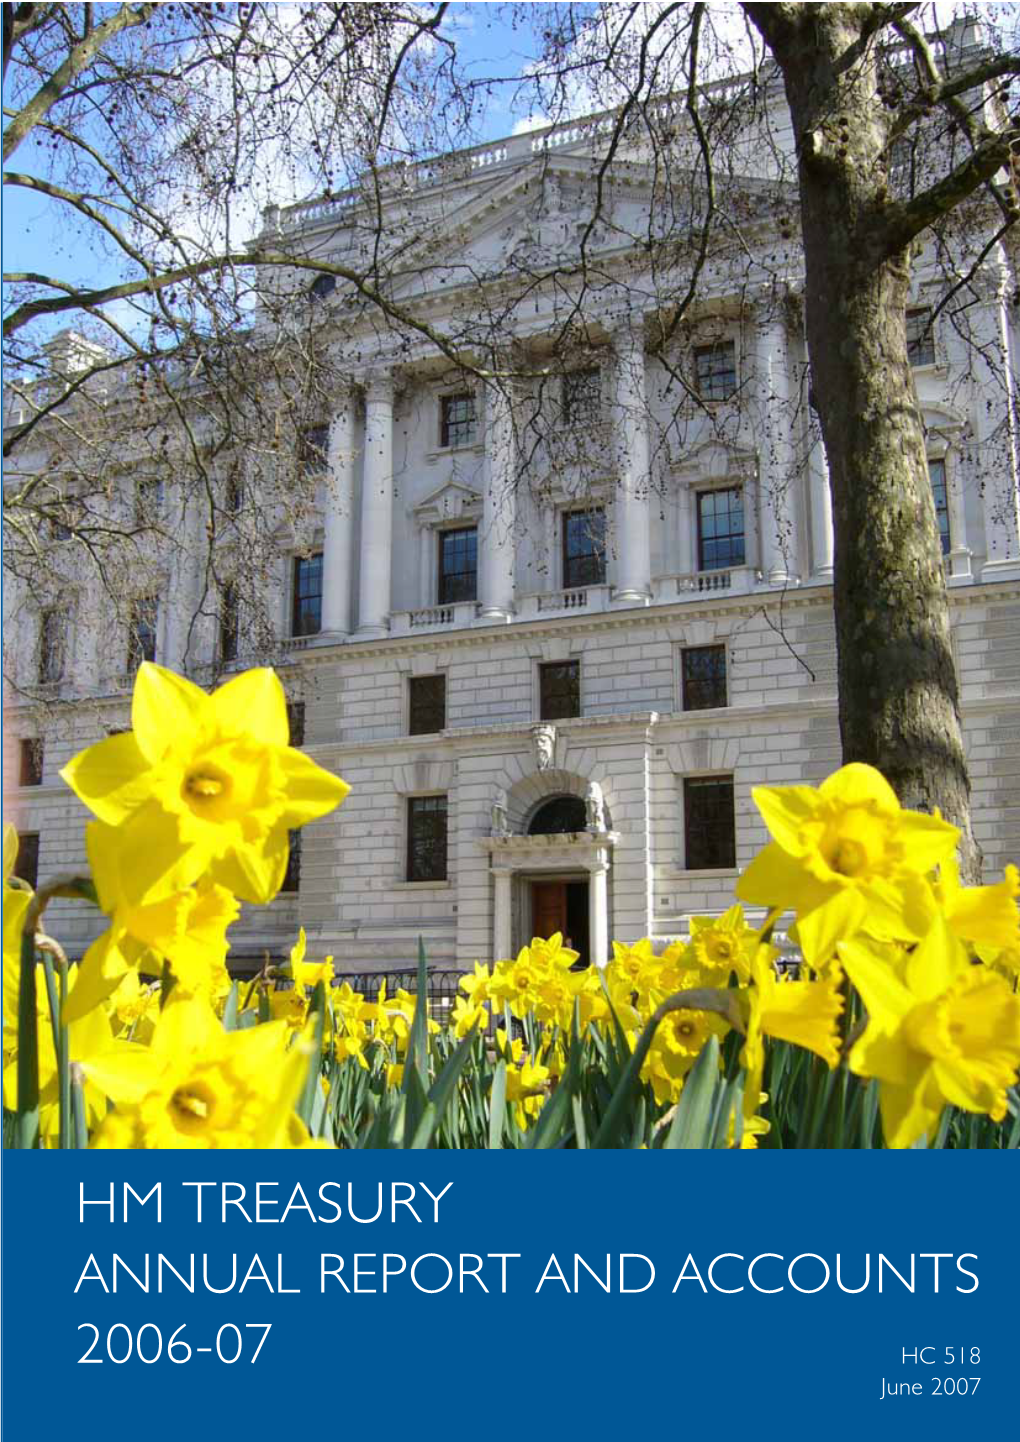 Hm Treasury Annual Report and Accounts 2006-07 Hc